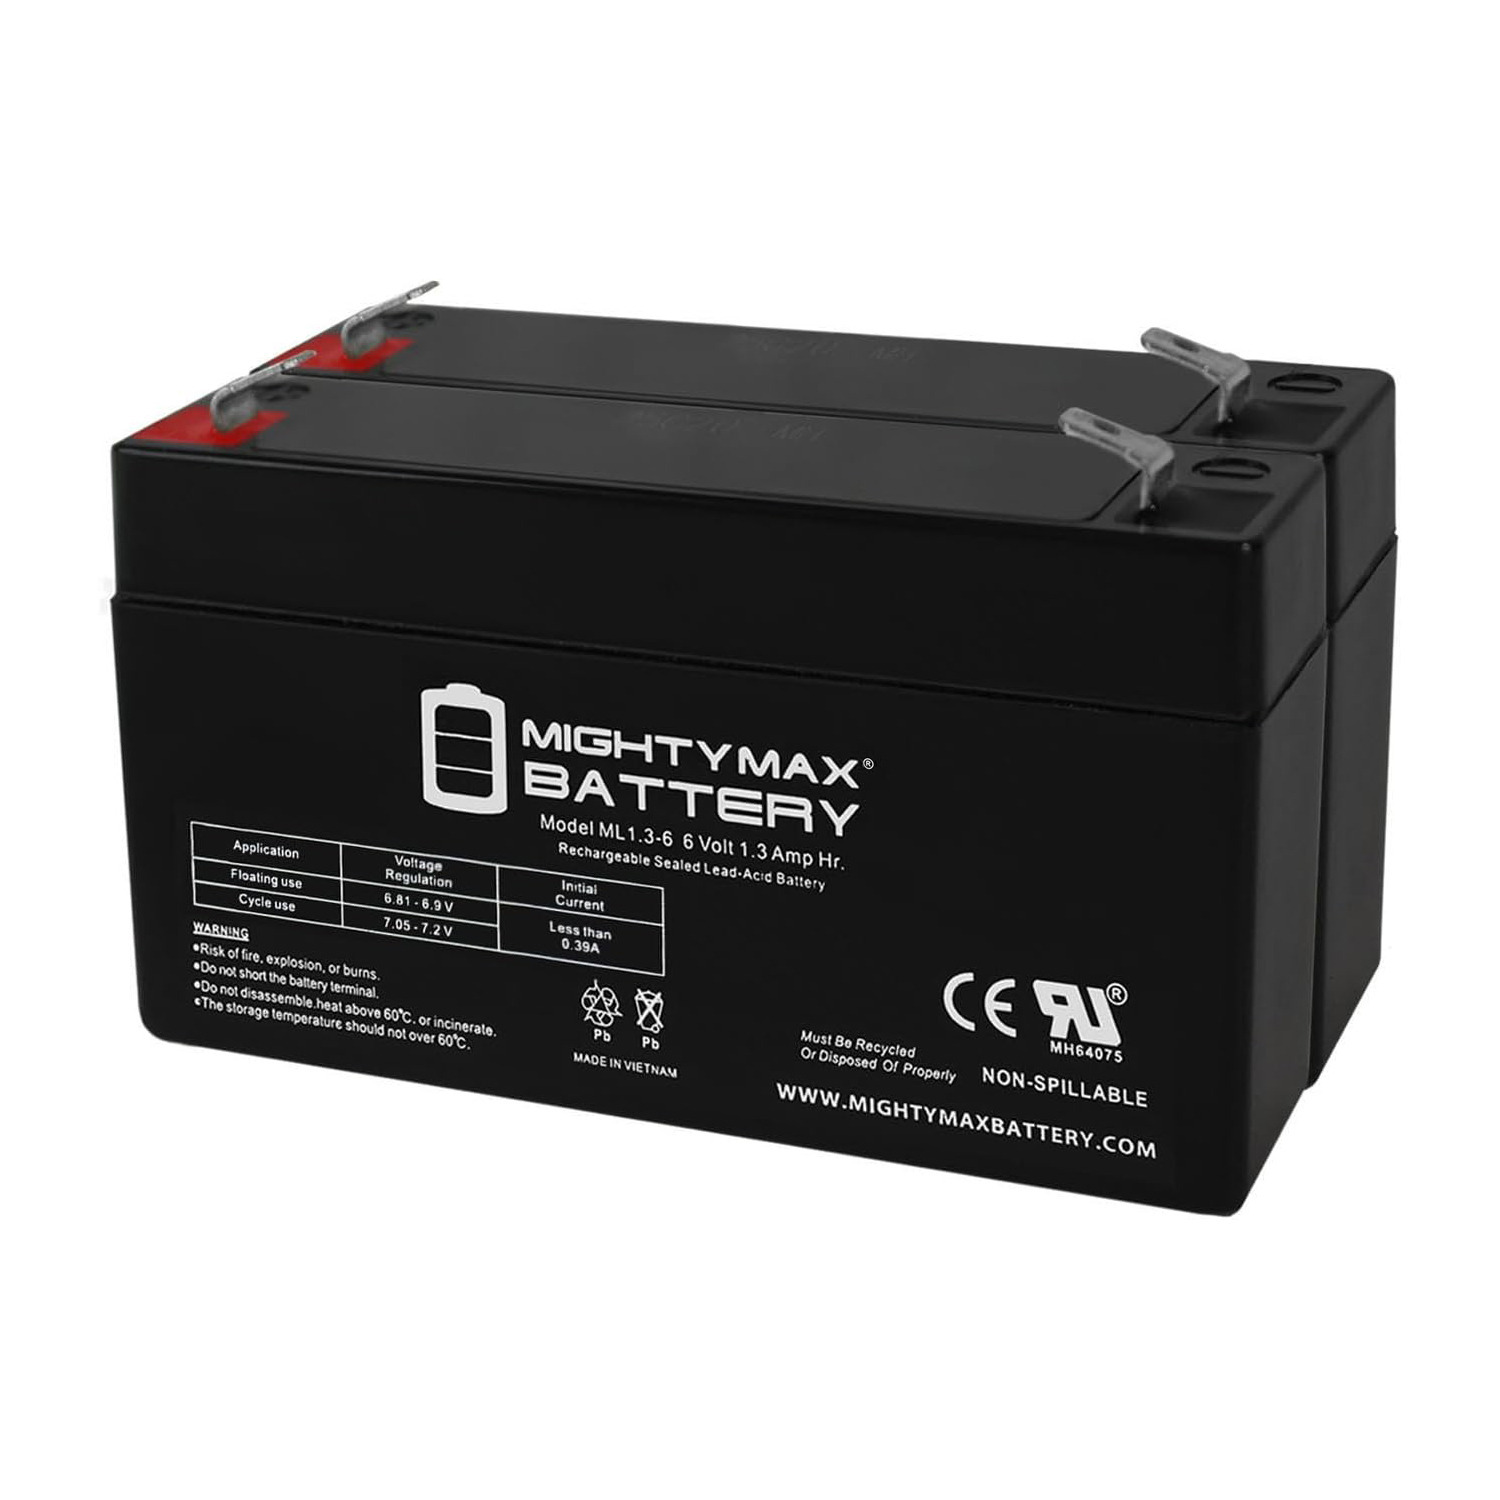 6V 1.3Ah SLA Replacement Battery for Newmox FNC-612 - 2 Pack